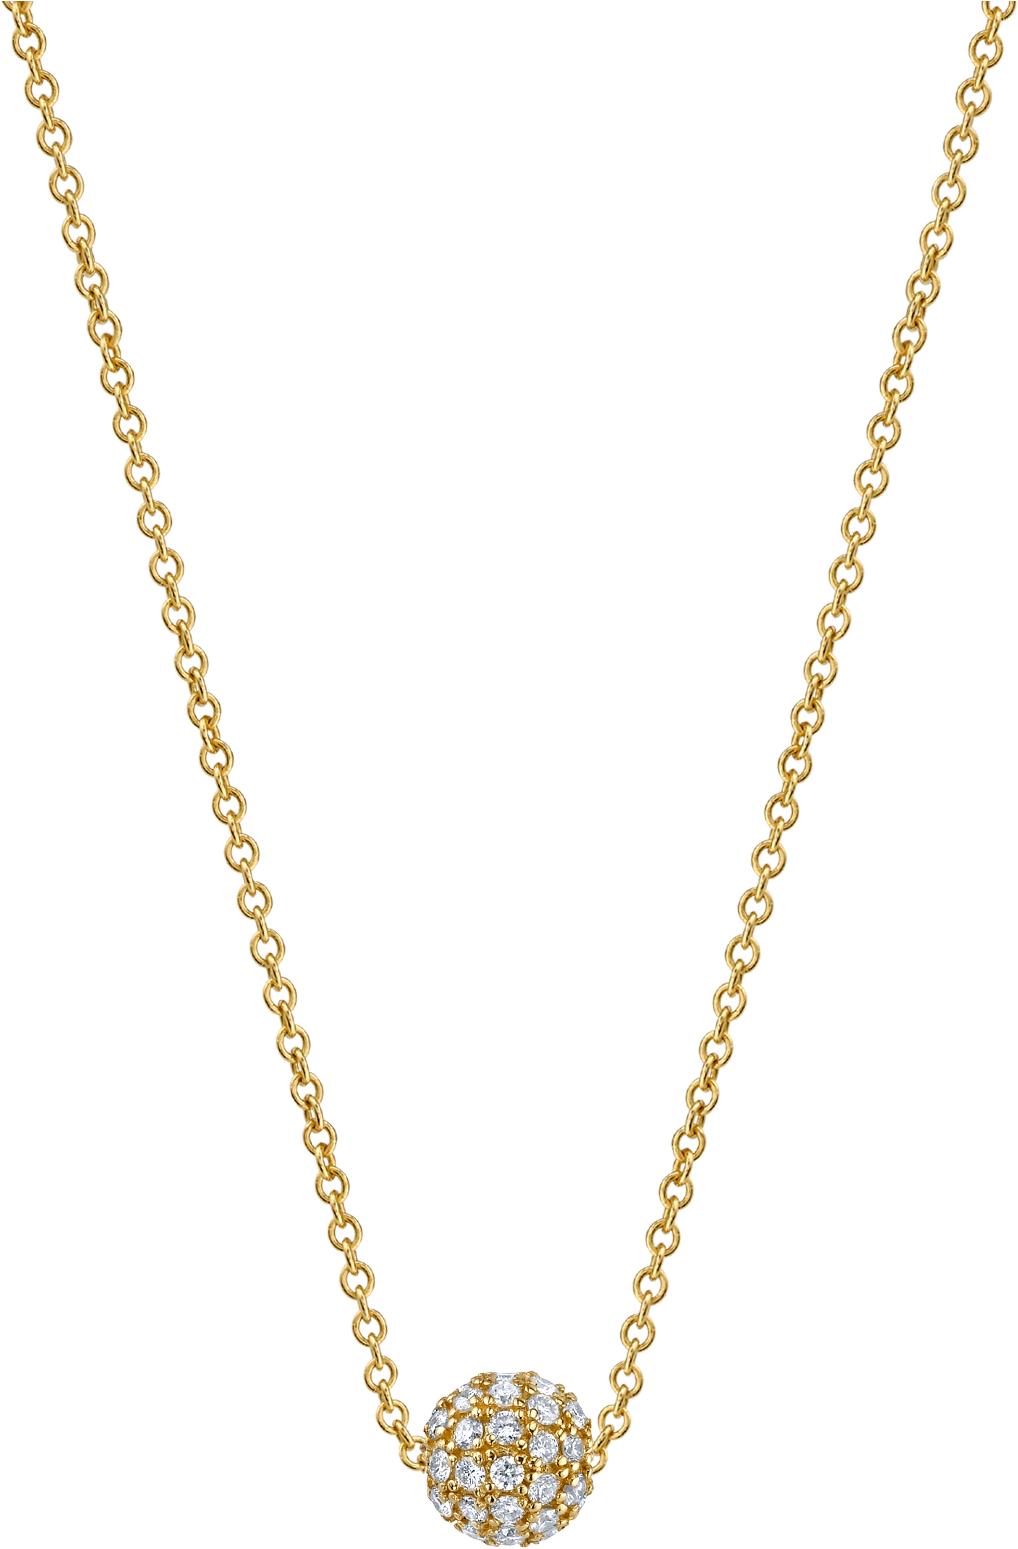 Traditional Gold Mangalsutra Design PNG